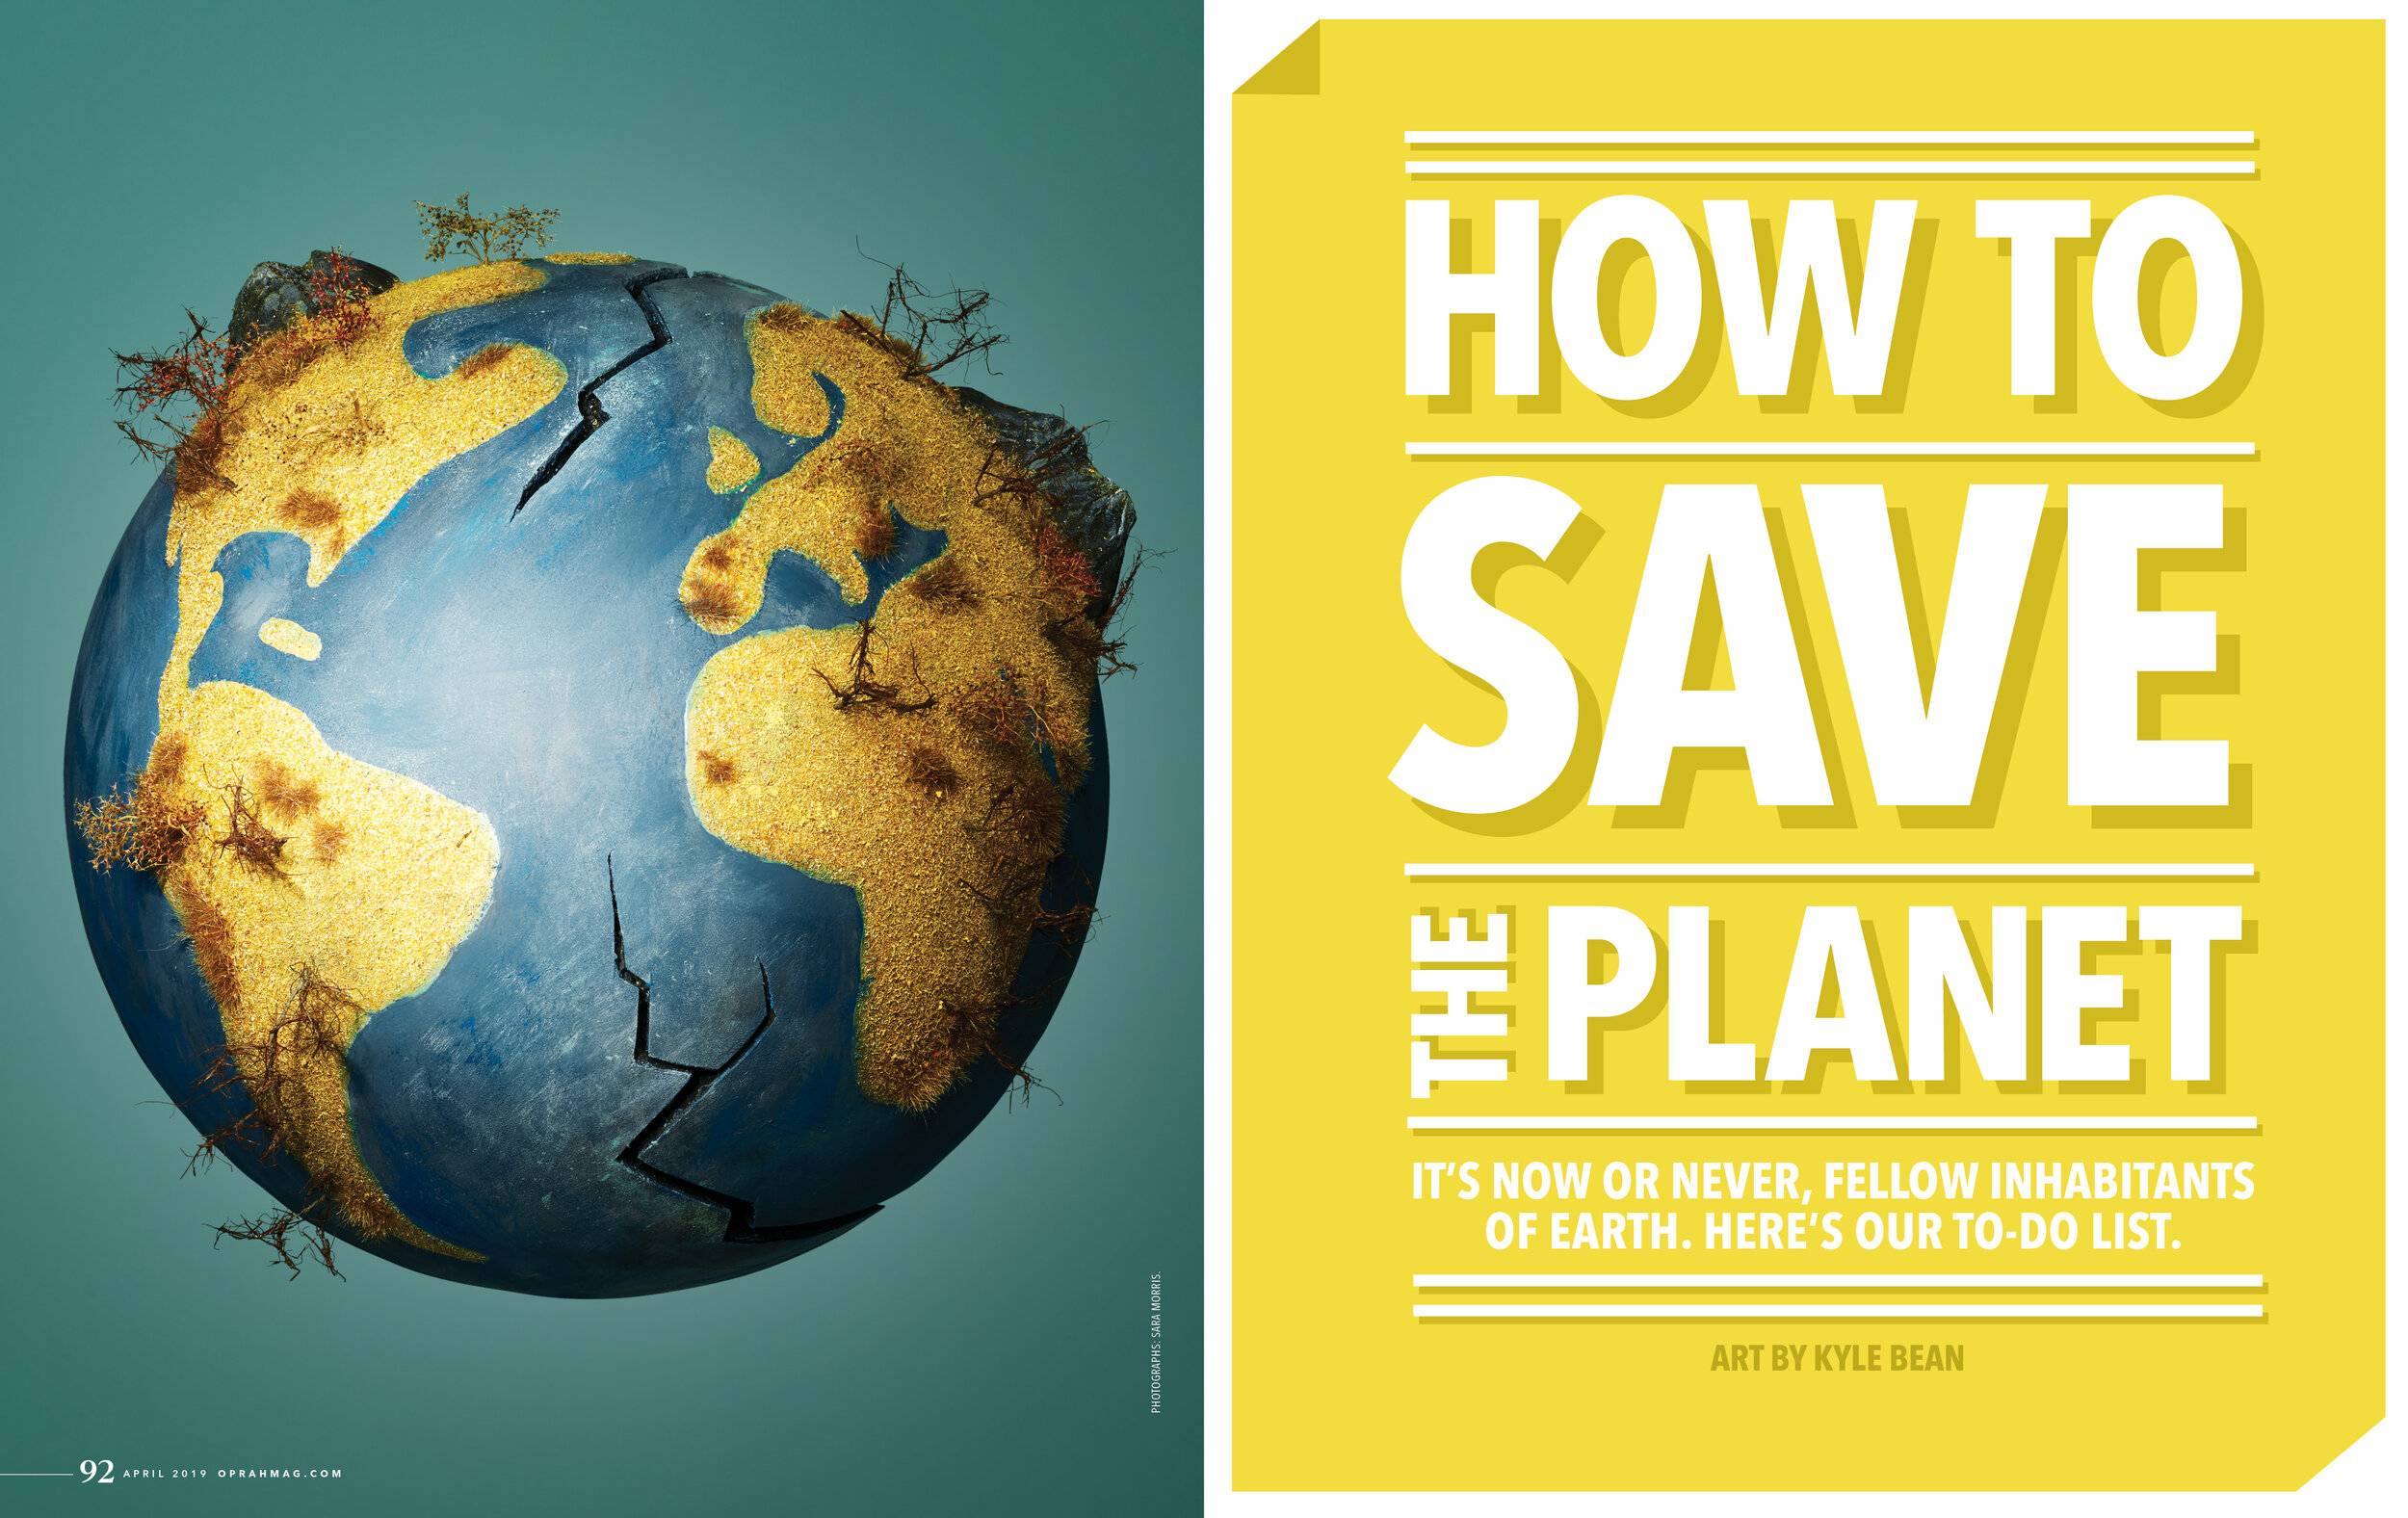 "How to save the planet"